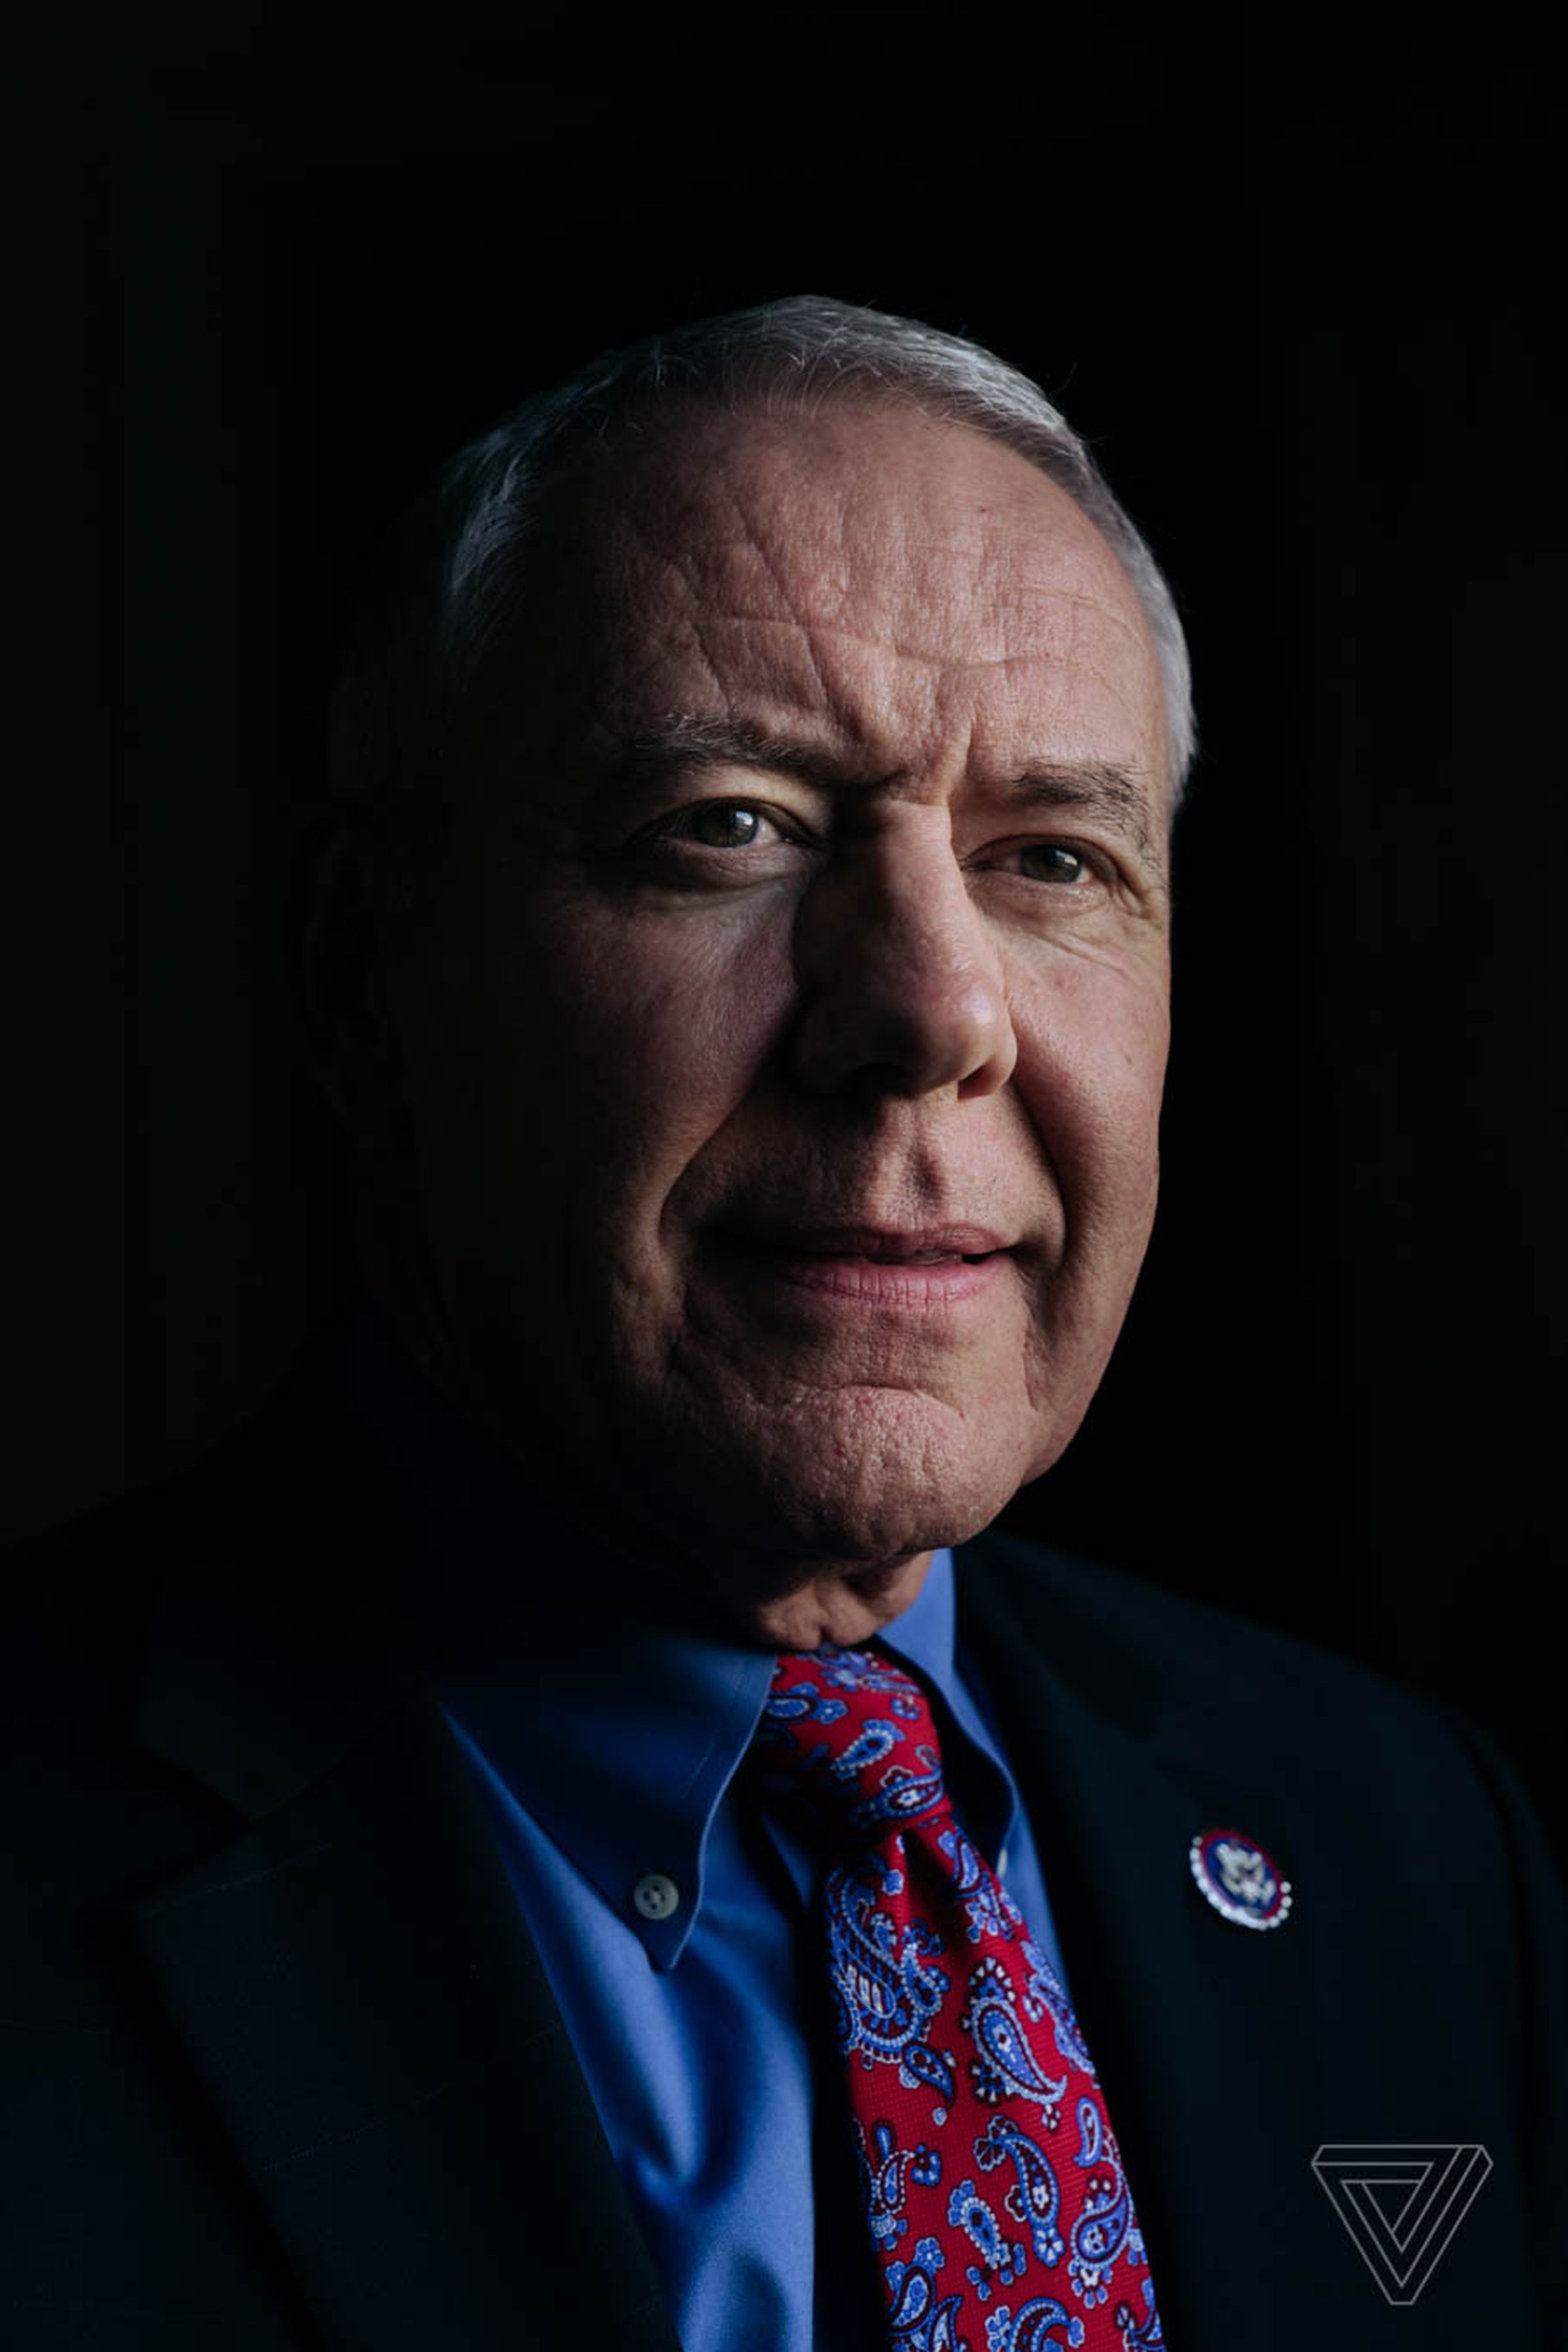 Congressman Ken Buck, R-Colo., at his office in the Rayburn Office Building in Washington, D.C., on June 30, 2021.